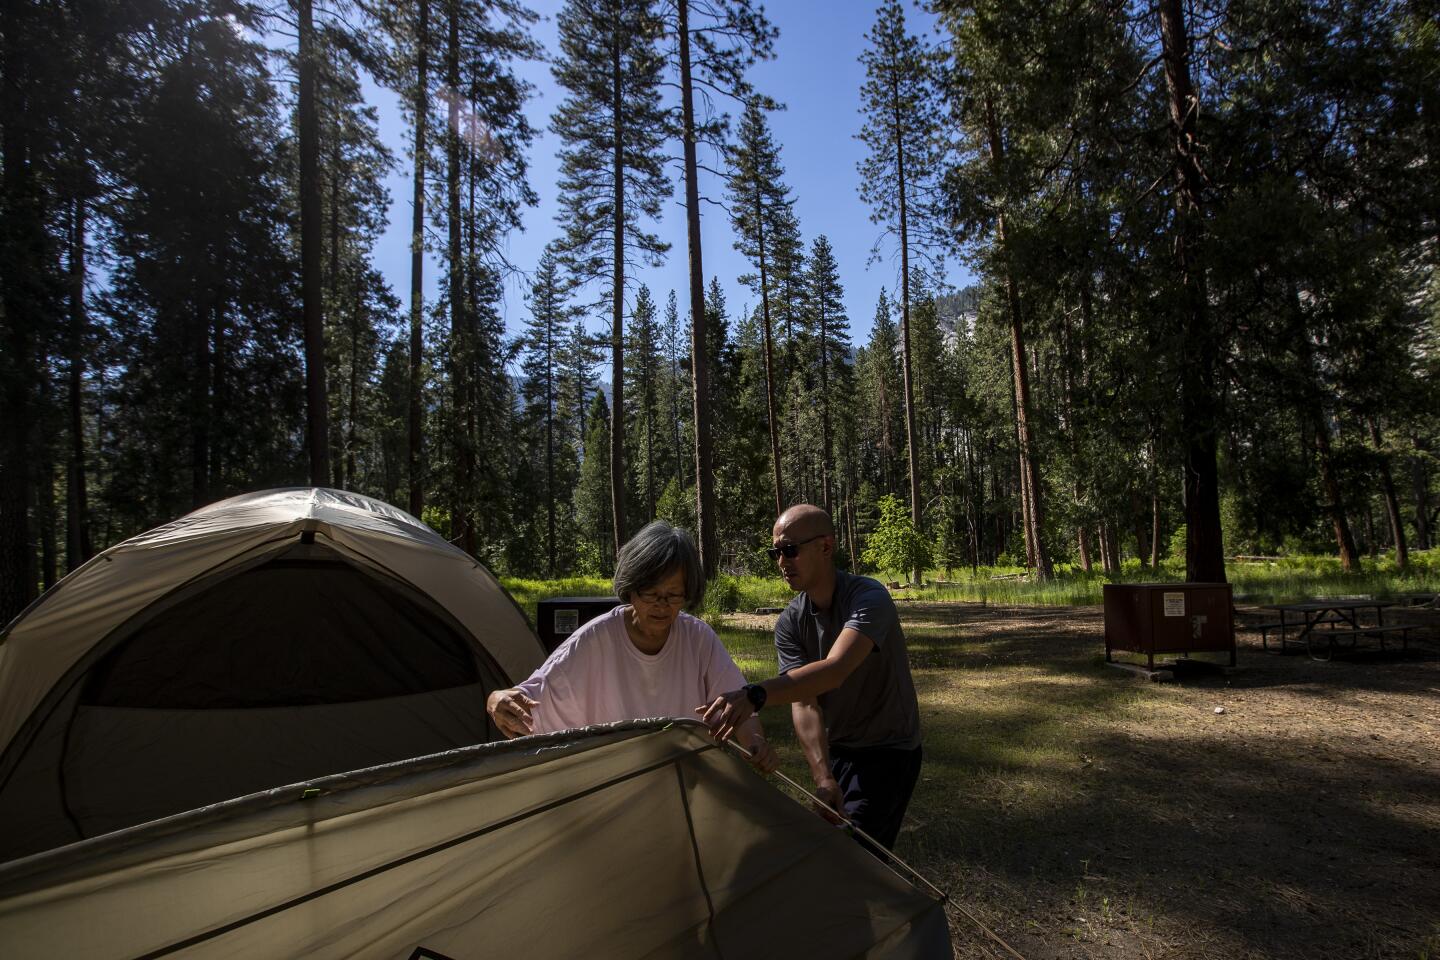 Gary Lin and his mother, May Lin, set up their tent in Upper Pines Campground.